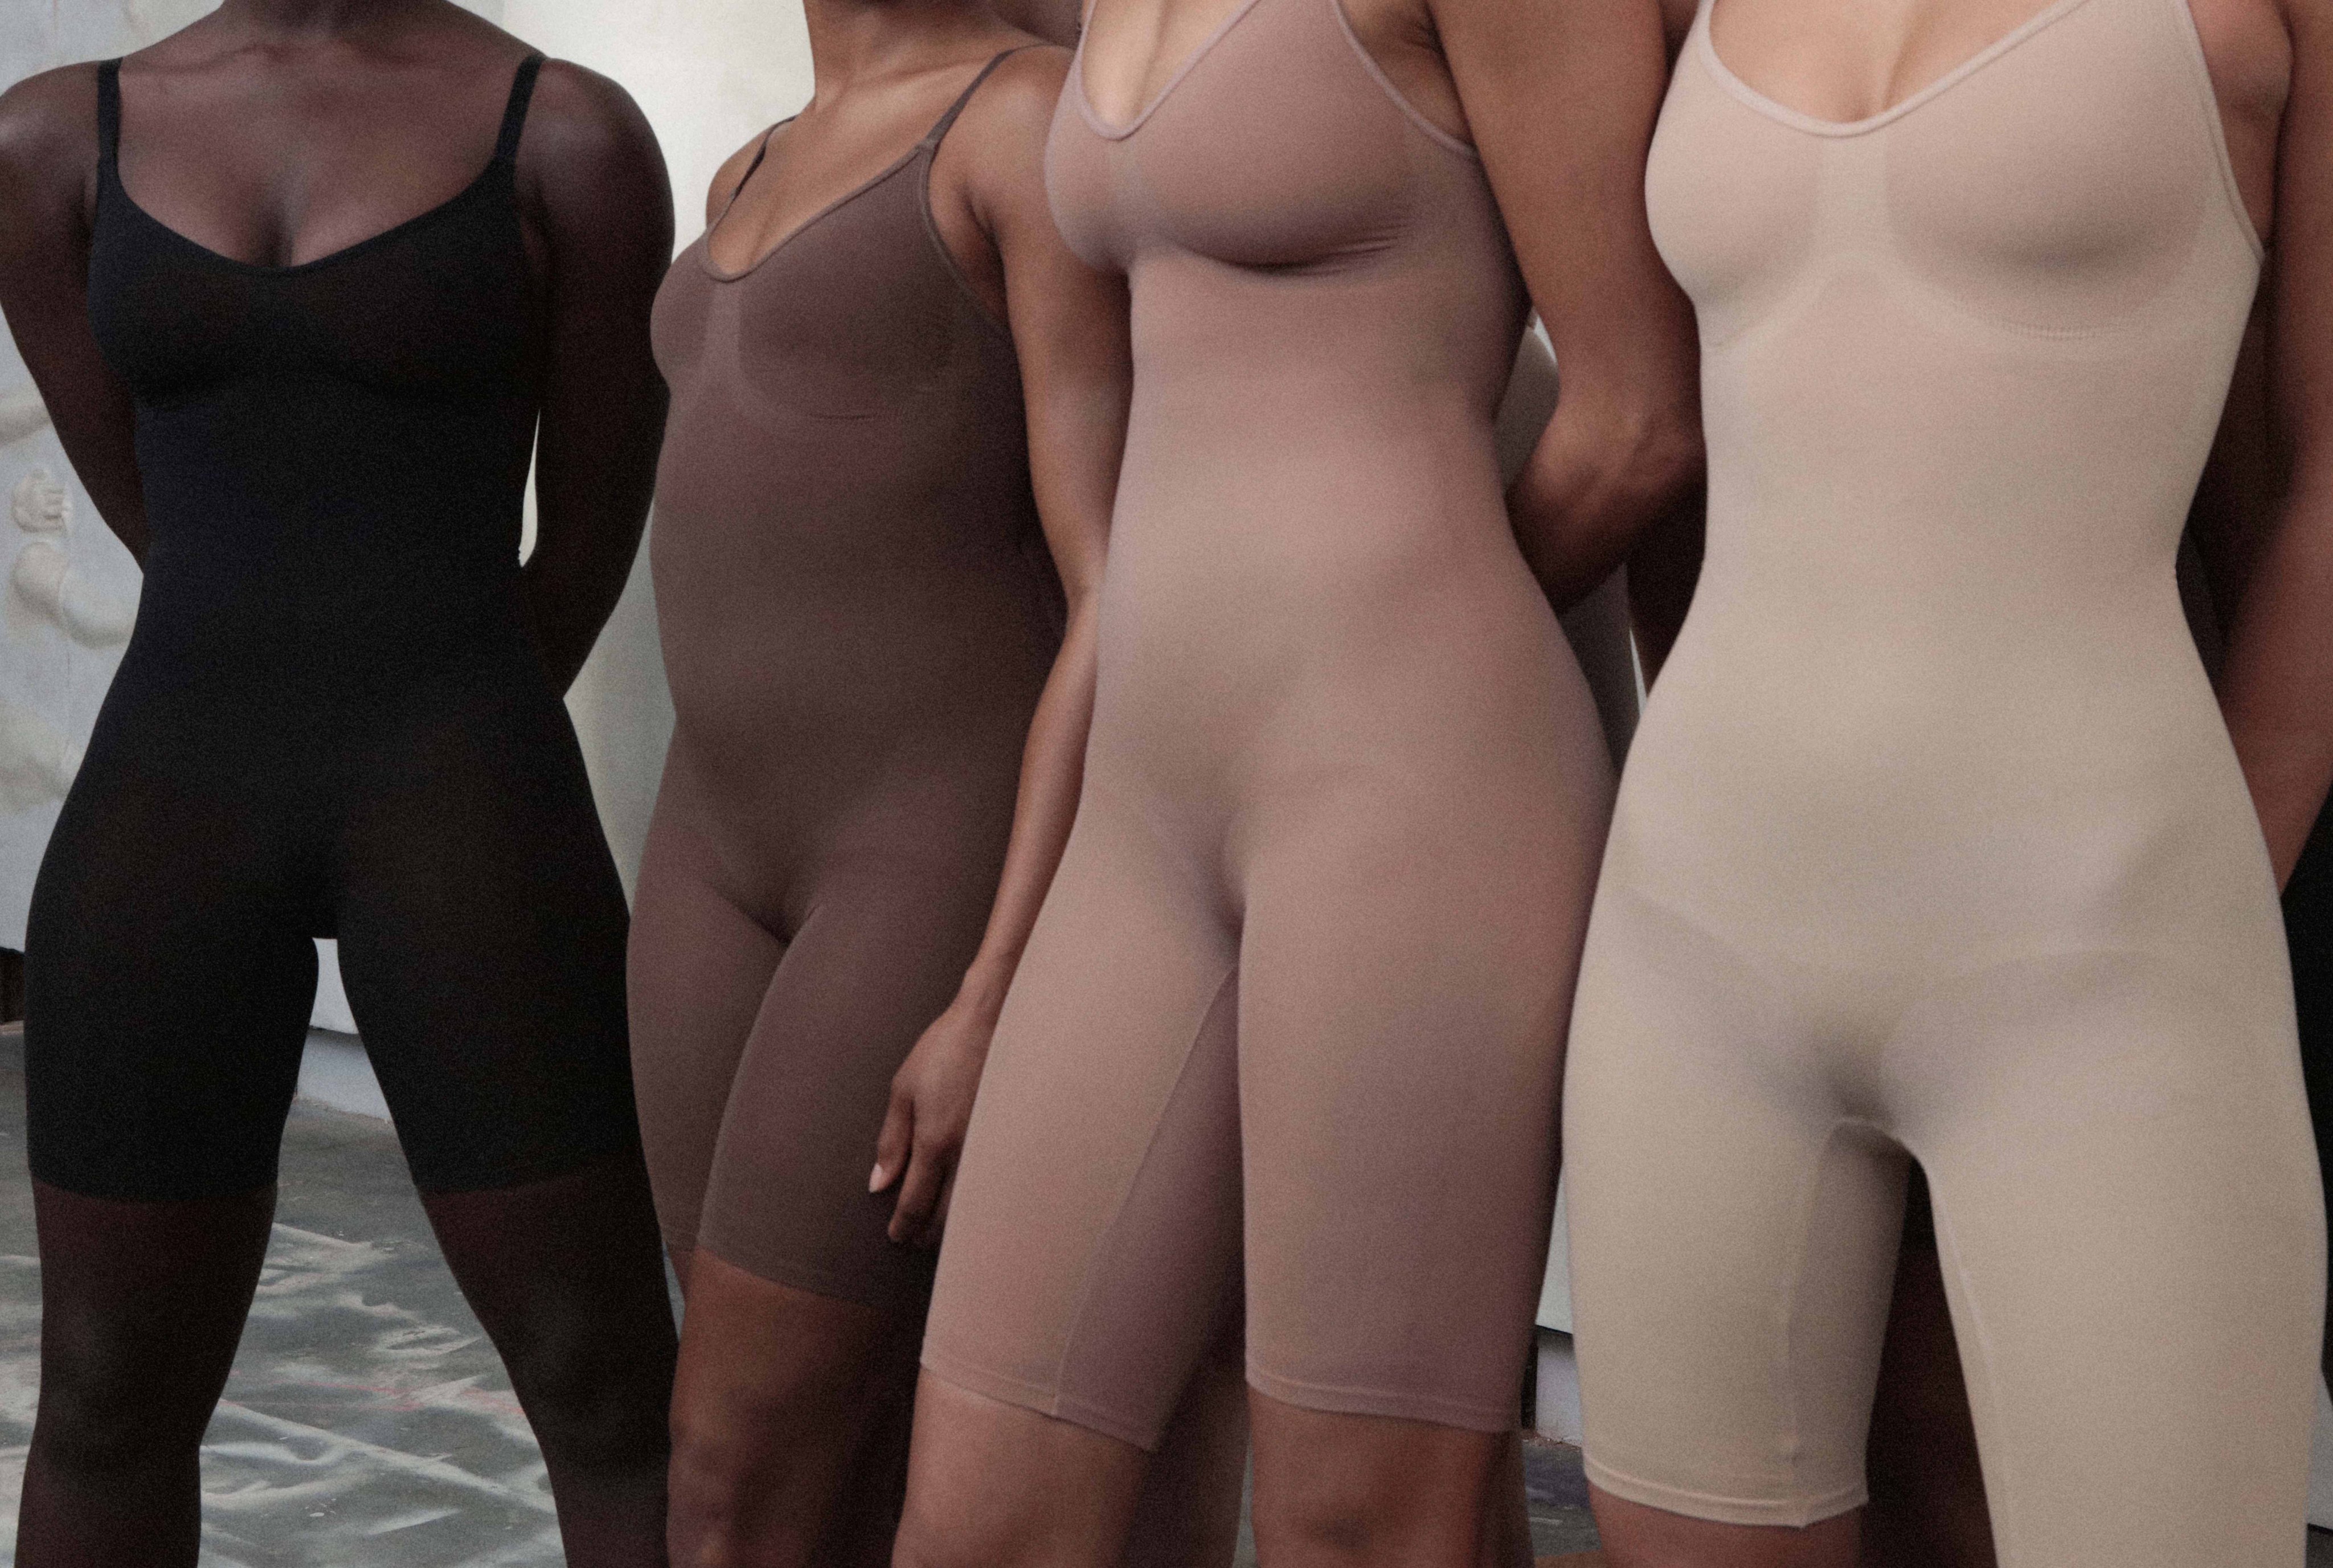 SKIMS on X: SKIMS Solutionwear™ — our best selling shapewear styles that  revolutionized the industry. Shop now in 9 colors and in sizes XXS - 5X and  enjoy free shipping on domestic